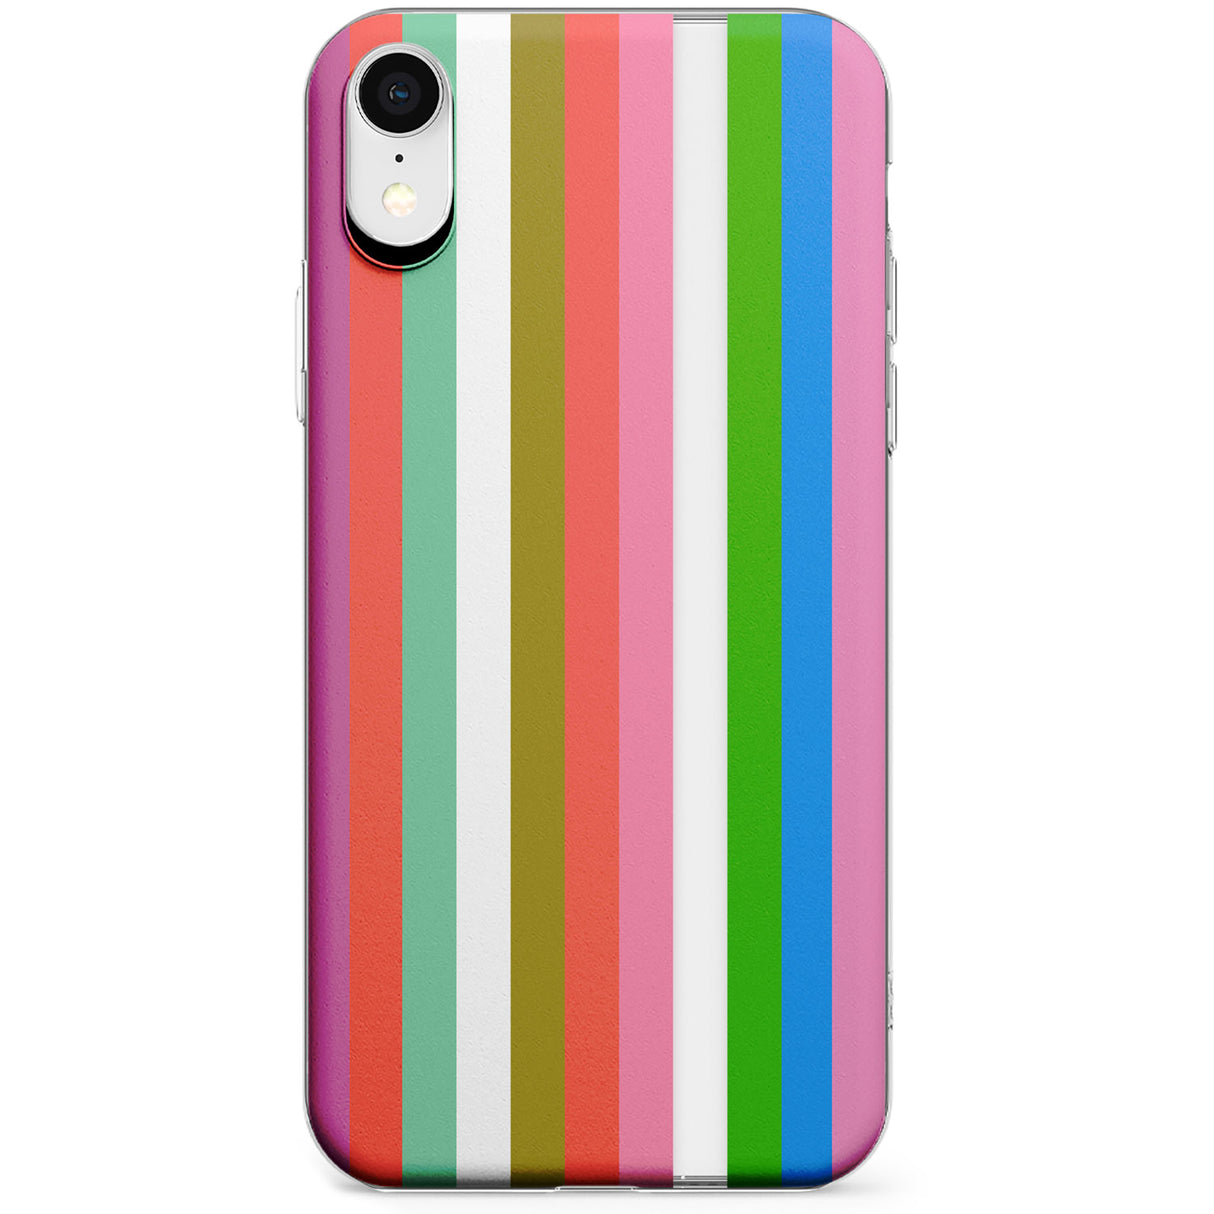 Vibrant Stripes Phone Case for iPhone X, XS Max, XR